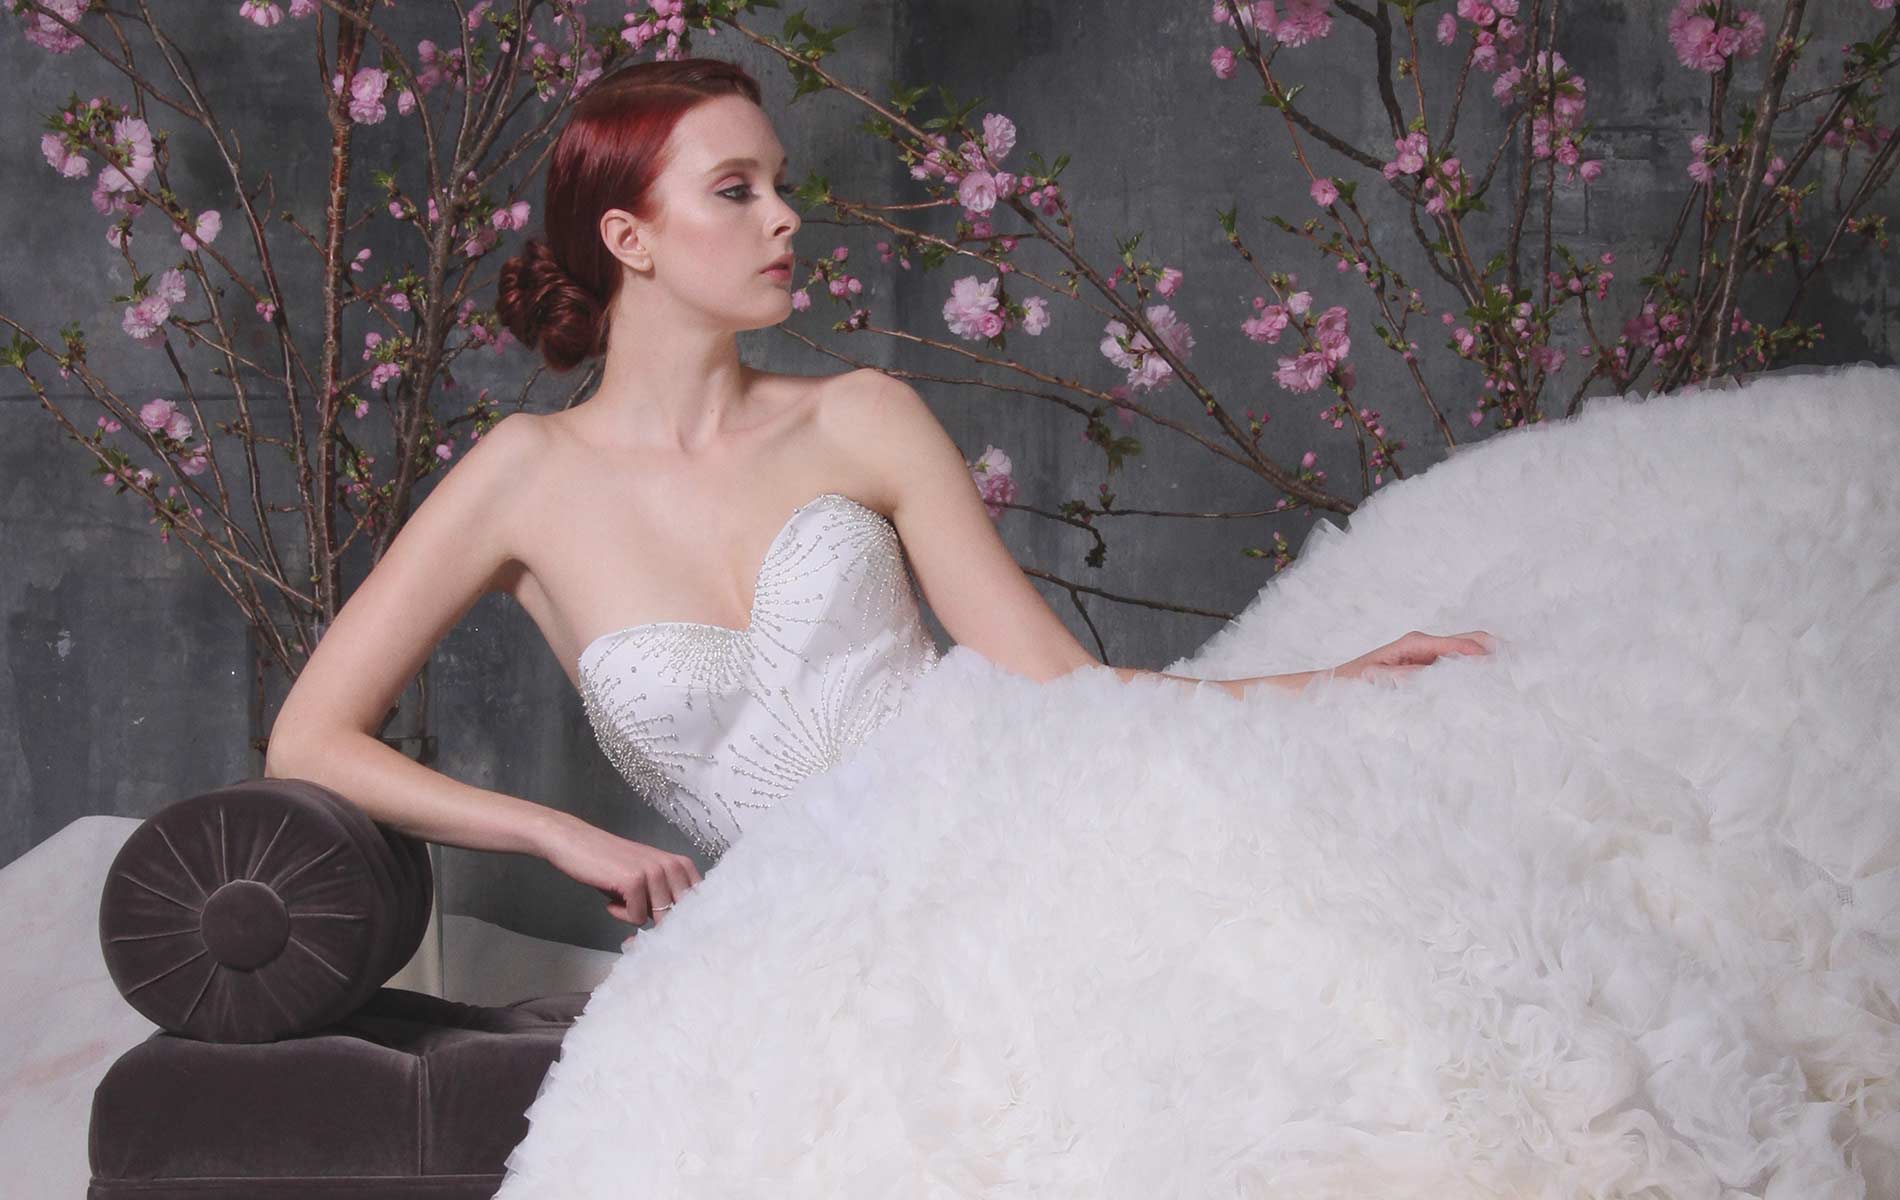 Model wearing a dress from the Christian Siriano Bridal line